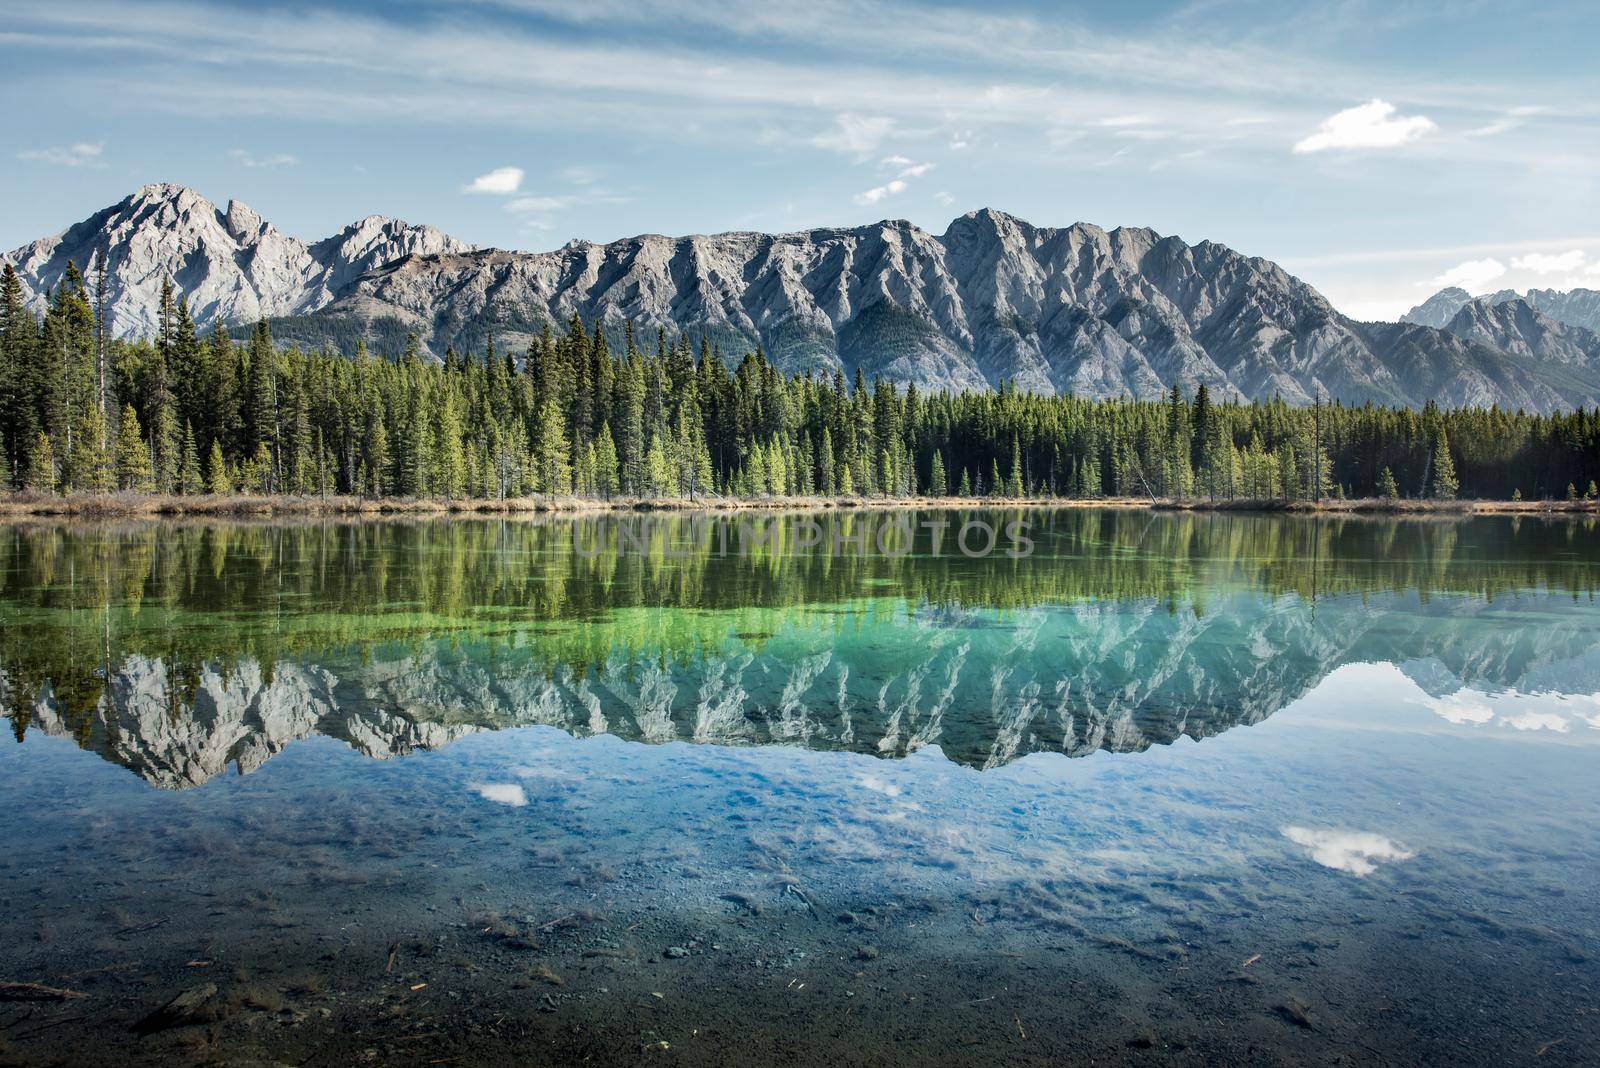 Sky and peaks refelcted in crystal clear lake in Calgary by lisaldw